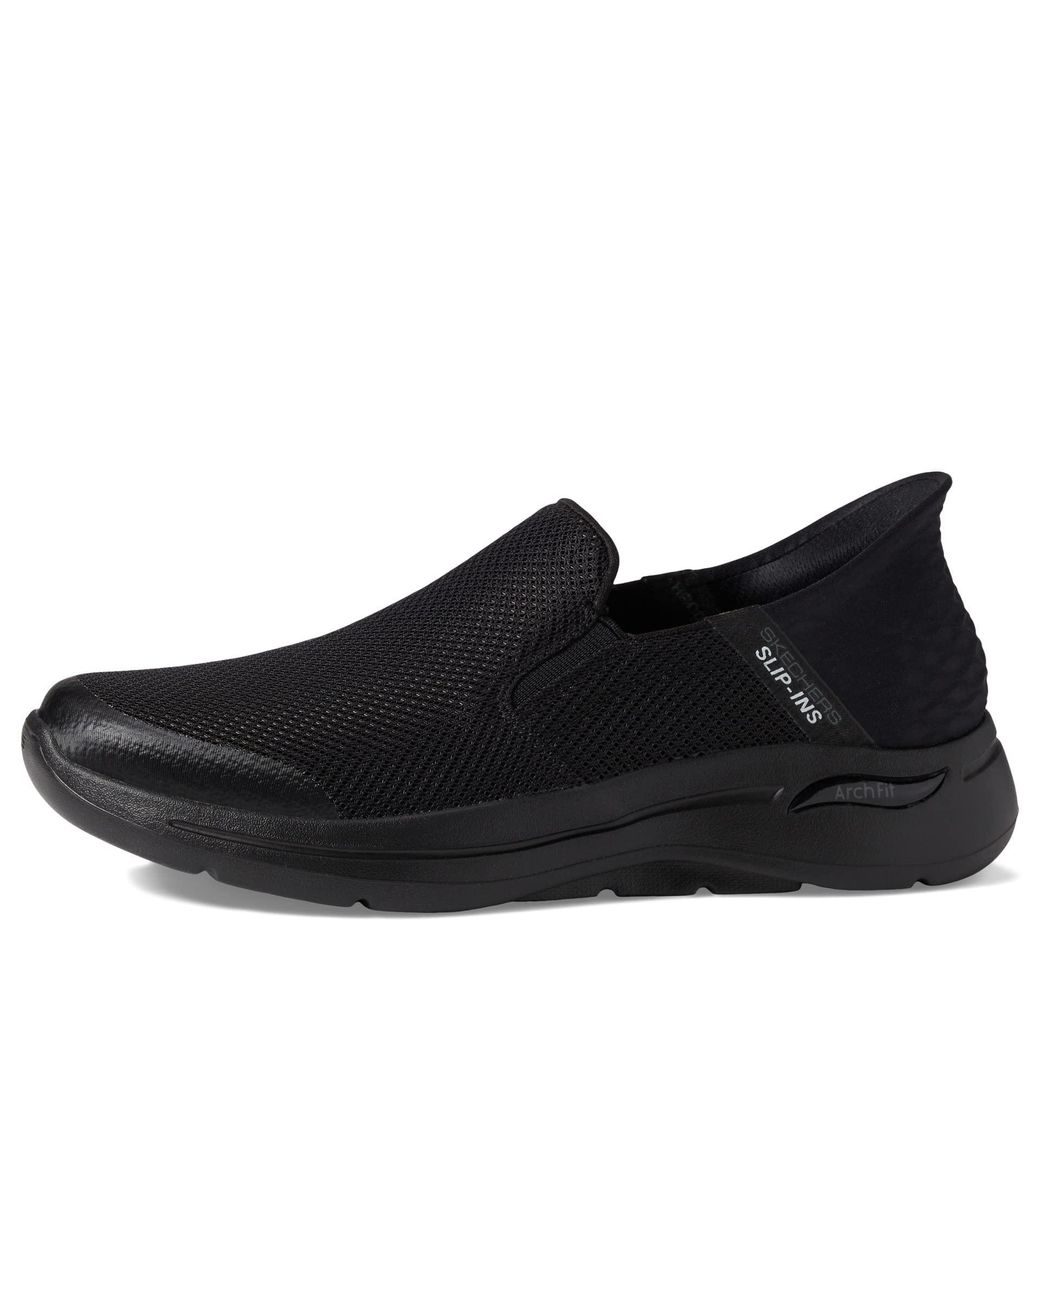 Skechers Gowalk Arch Fit Slip-ins-athletic Slip-on Casual Walking Shoes  With Air-cooled Foam Sneaker in Black for Men | Lyst